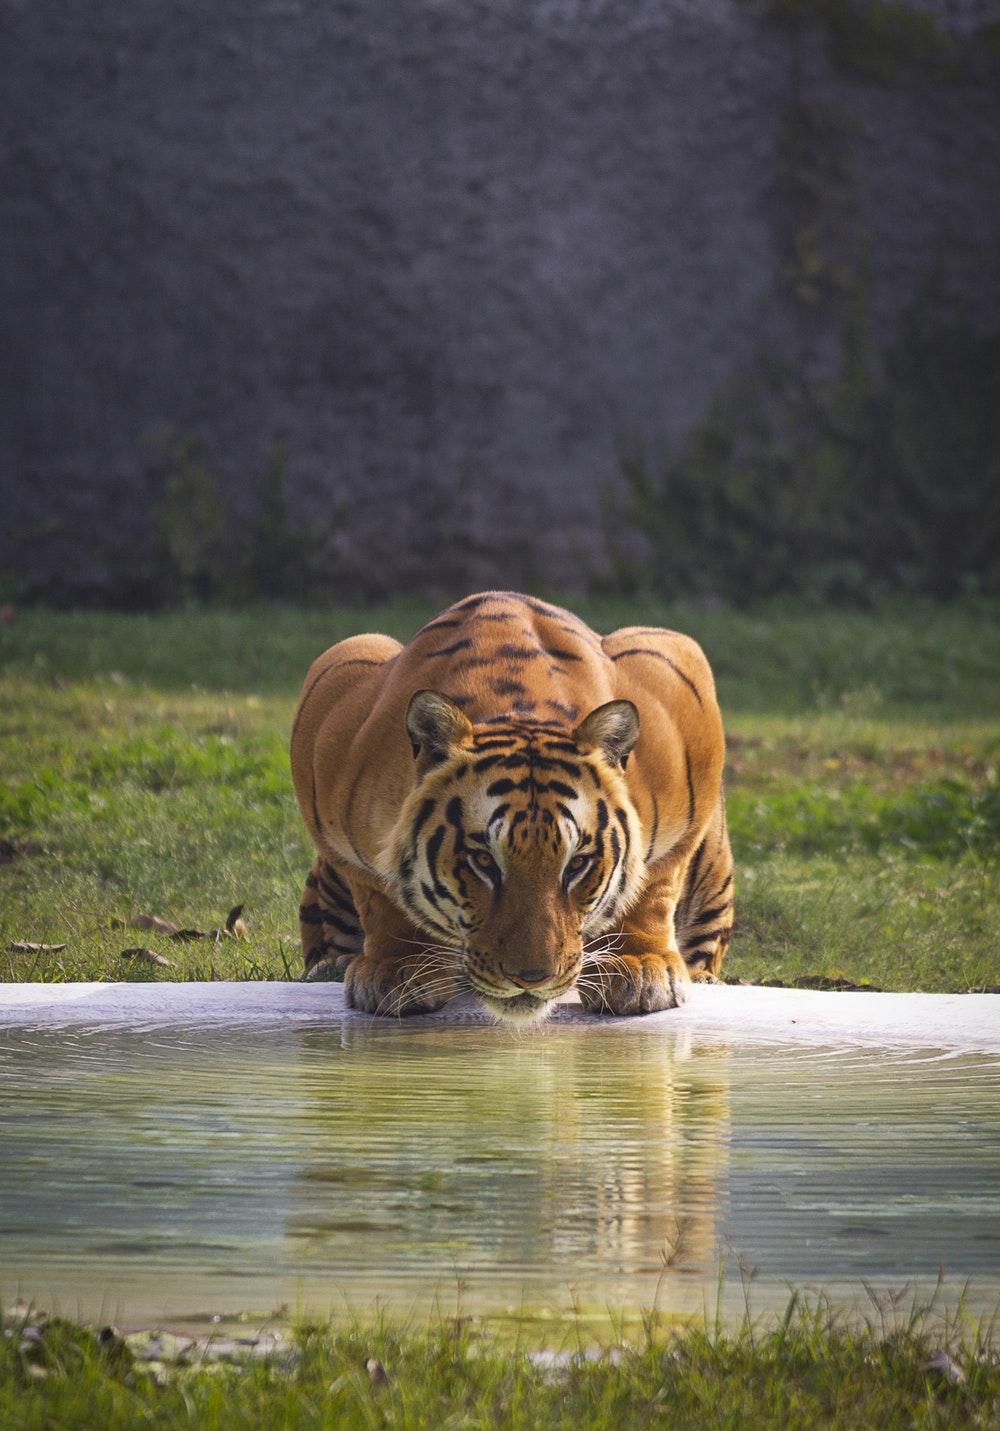 Tiger Picture. Download Free Image